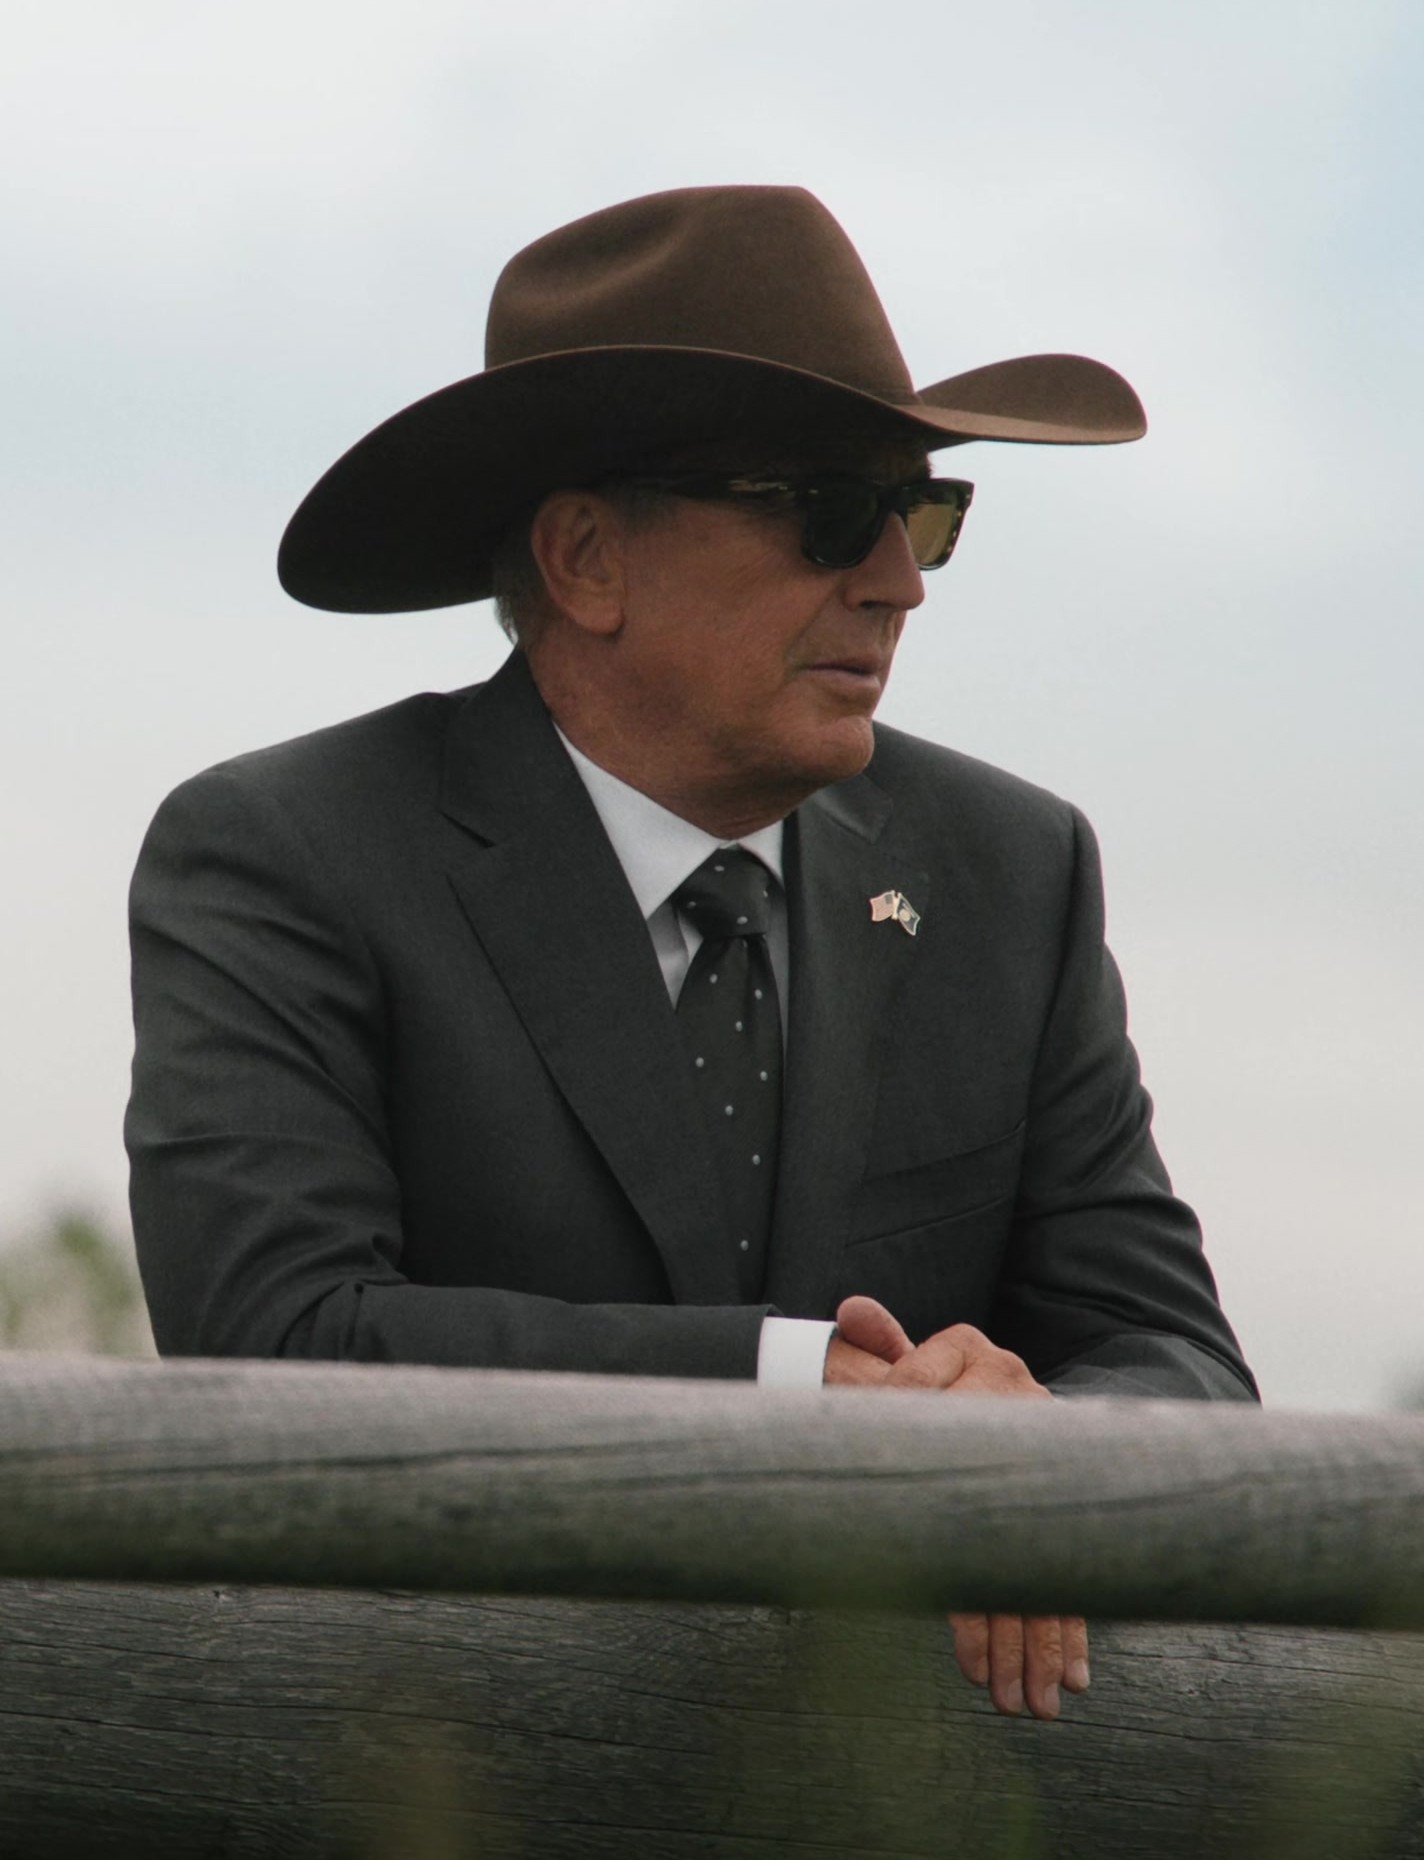 Worn on Yellowstone TV Show - Brown Wide-Brimmed Cowboy Hat of Kevin Costner as John Dutton III